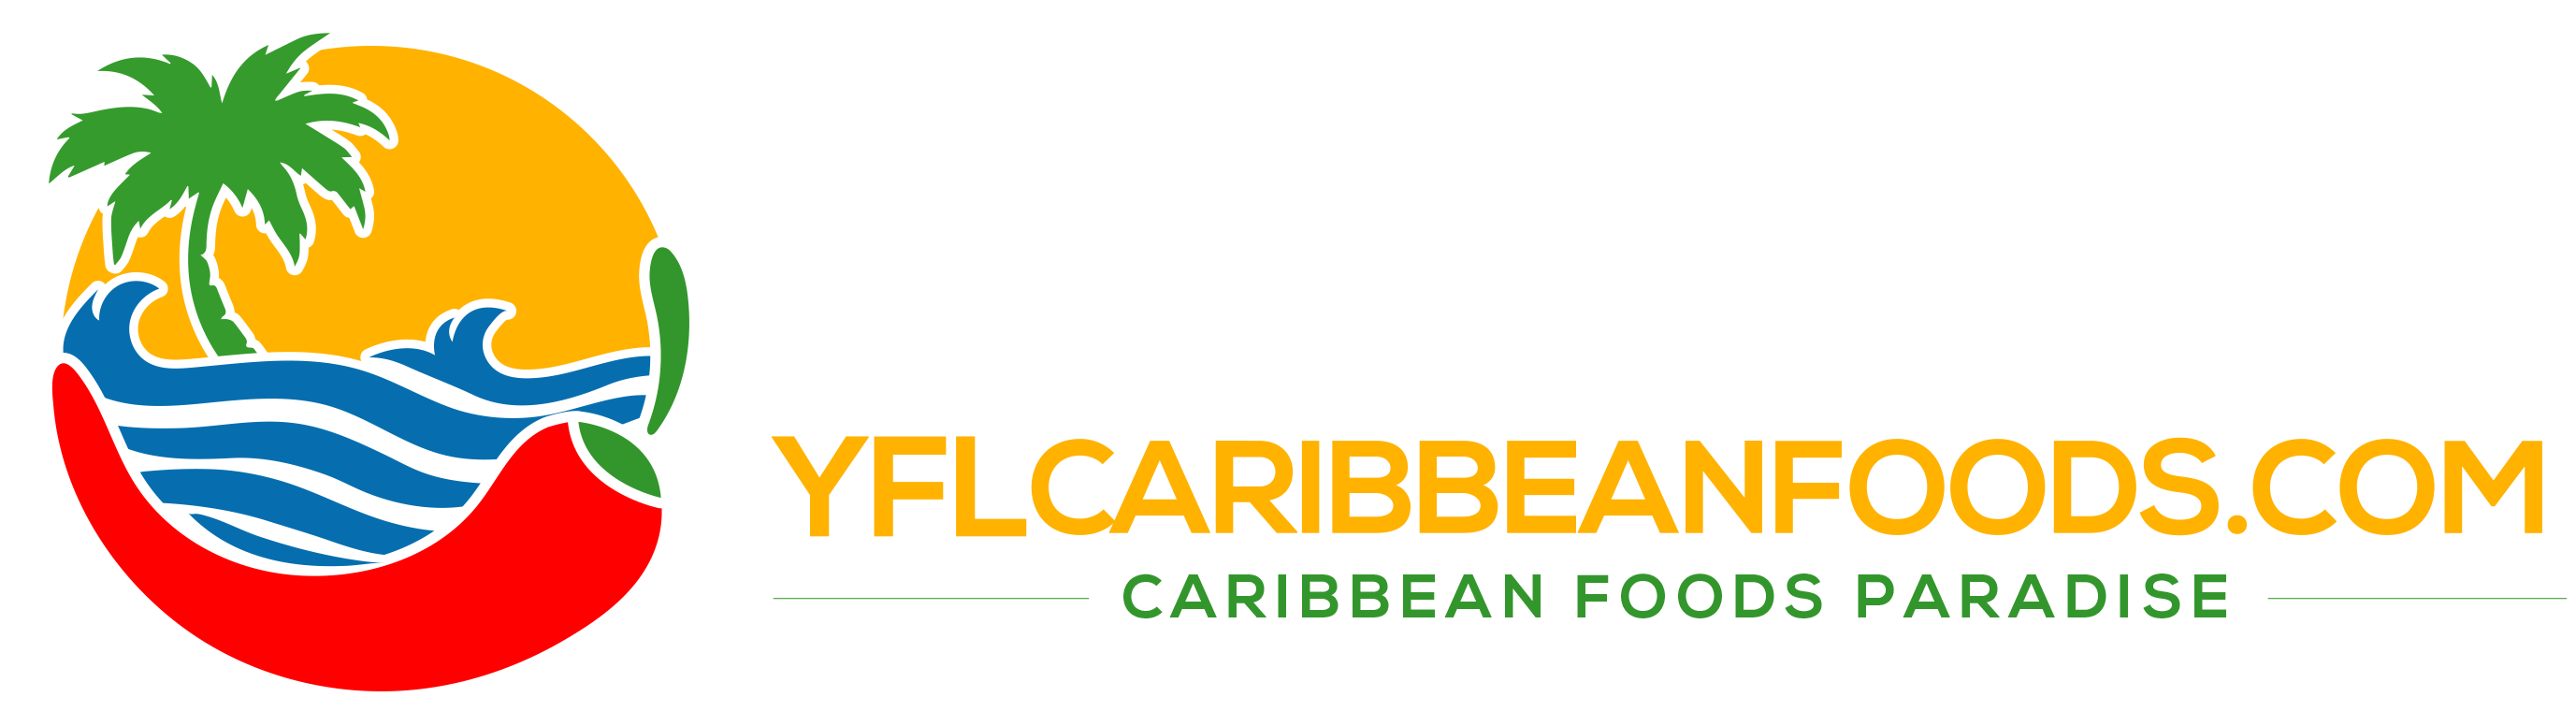 YFLcaribbeanfoods.com - Caribbean Foods and Groceries Paradise